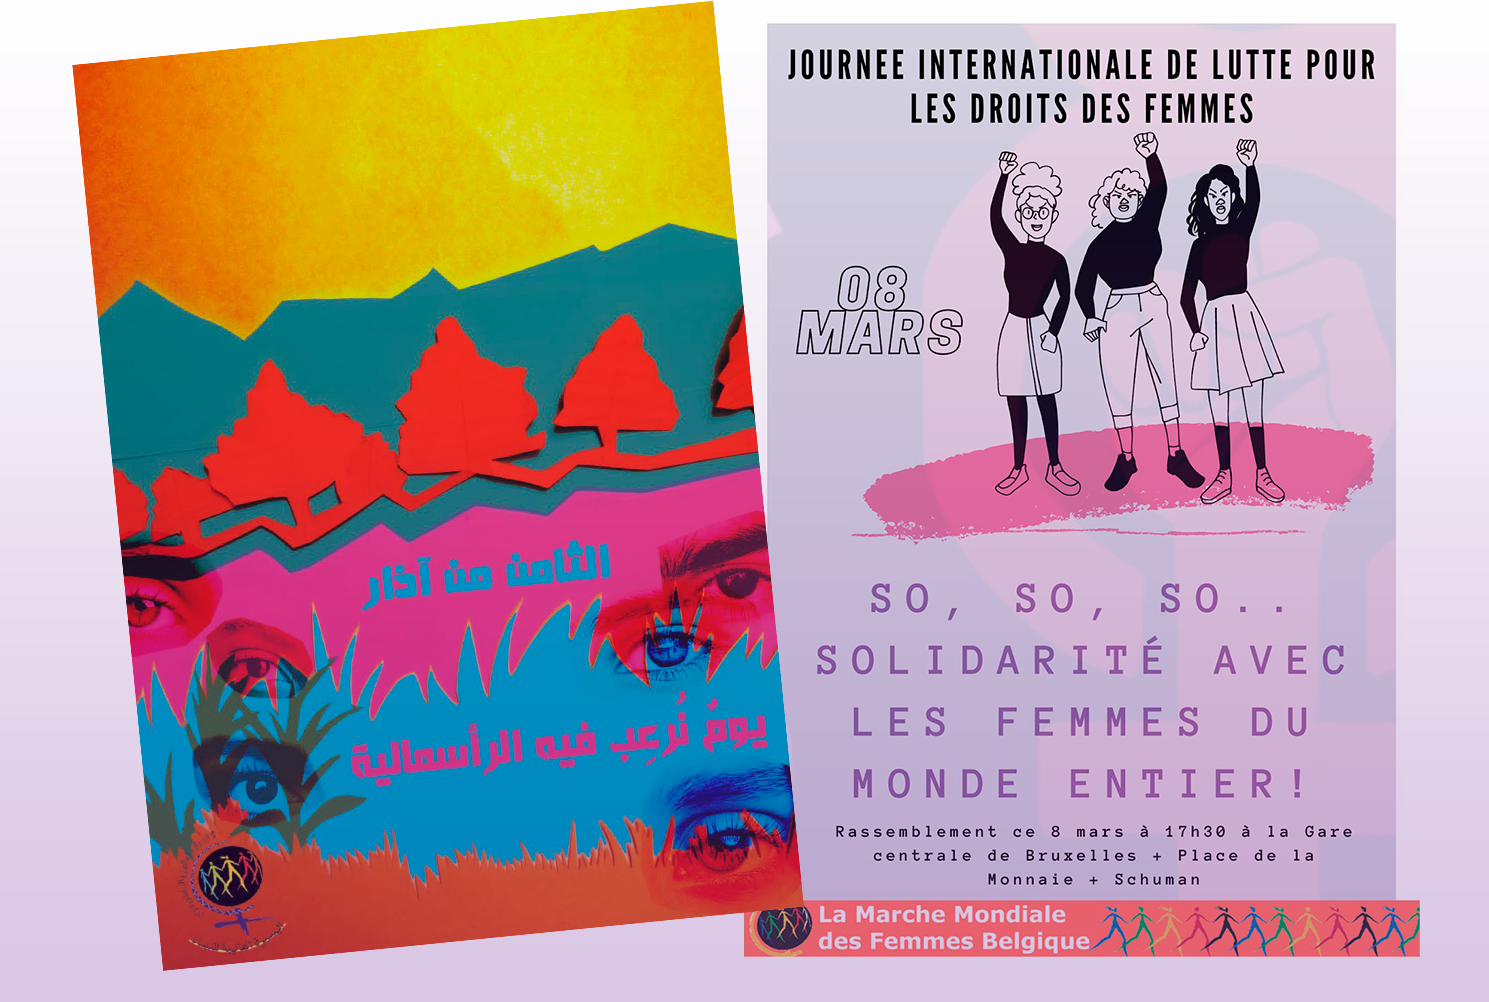 Call for Posters: Anti-Imperialist Feminism To Change the World